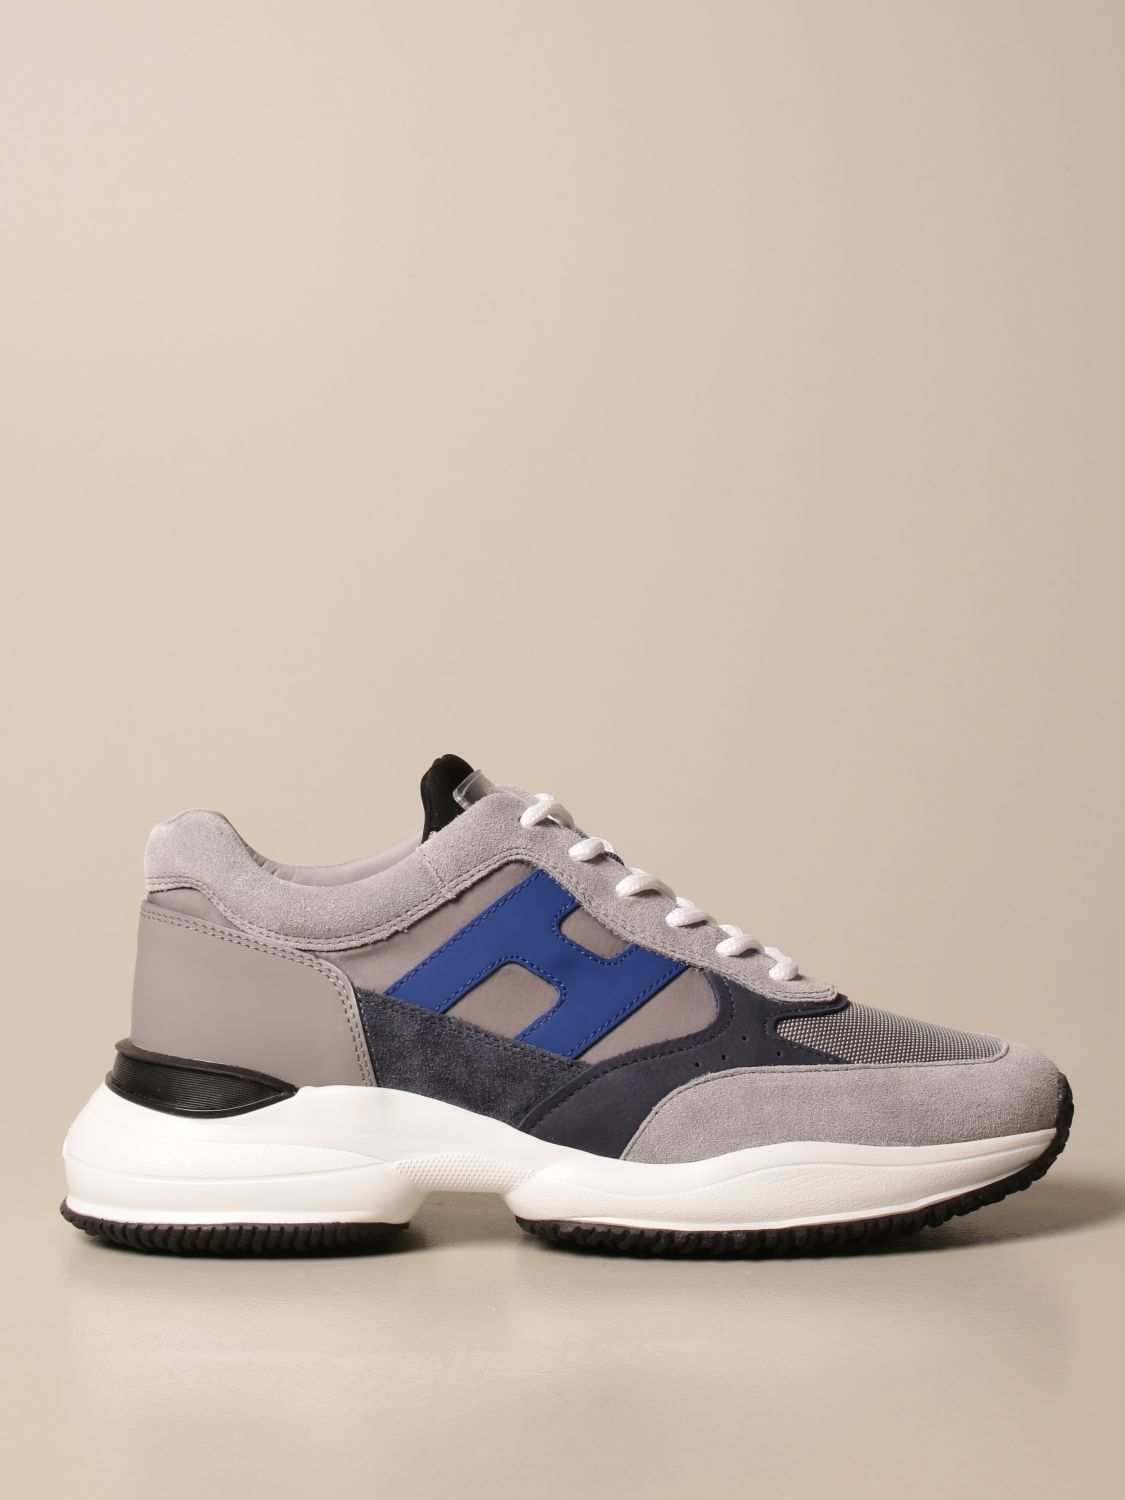 Interaction sneakers in suede leather and mesh | Sneakers Hogan Grey | Sneakers Hogan HXM5450DN90 PNS GIGLIO.COM